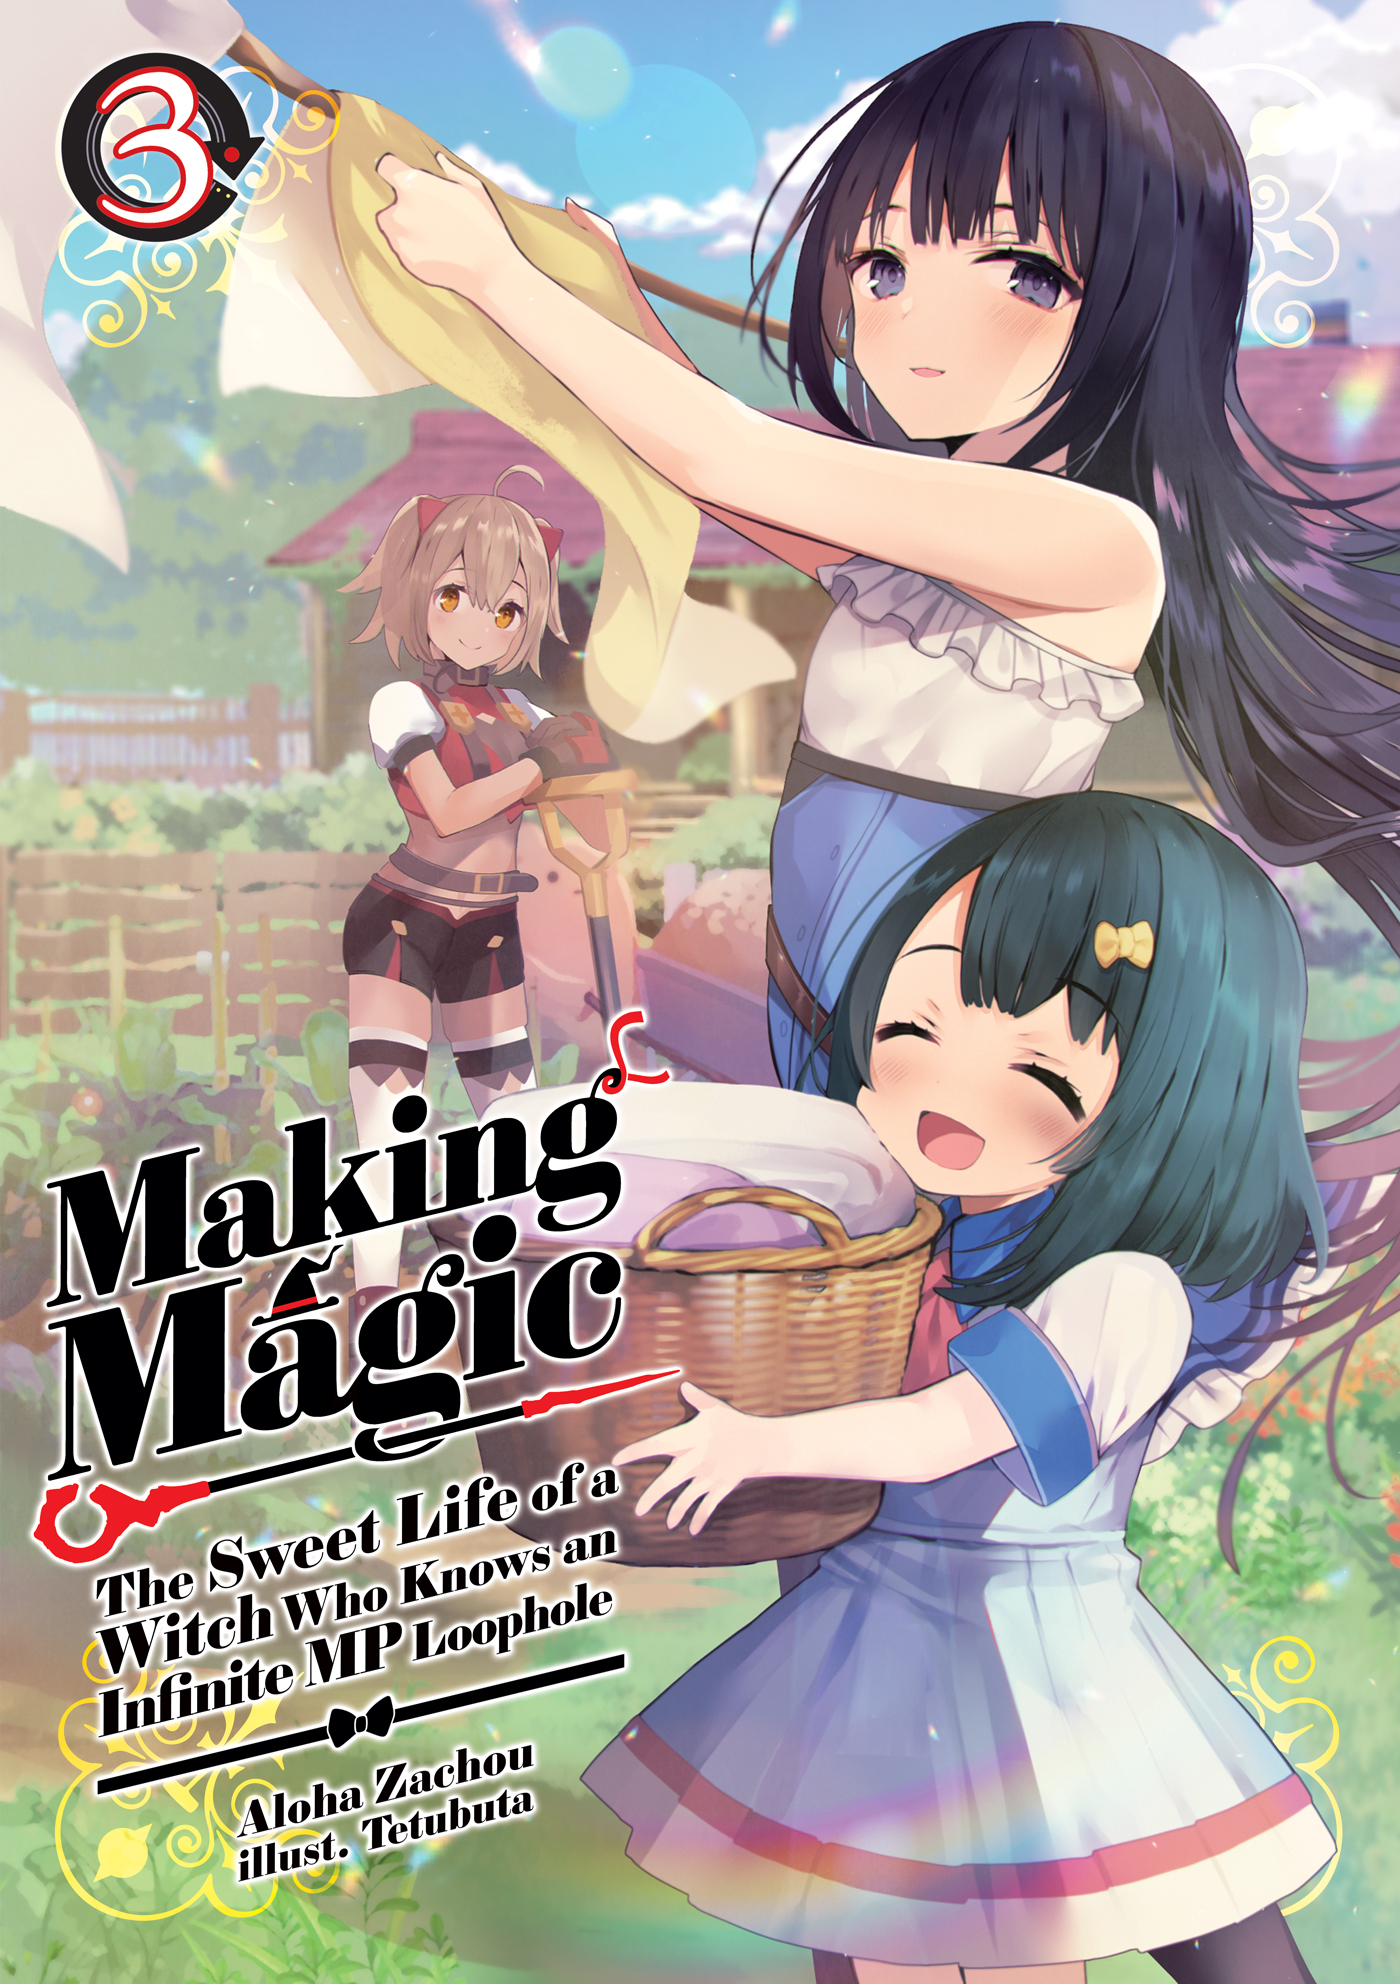 Making Magic: The Sweet Life of a Witch Who Knows an Infinite MP Loophole #003